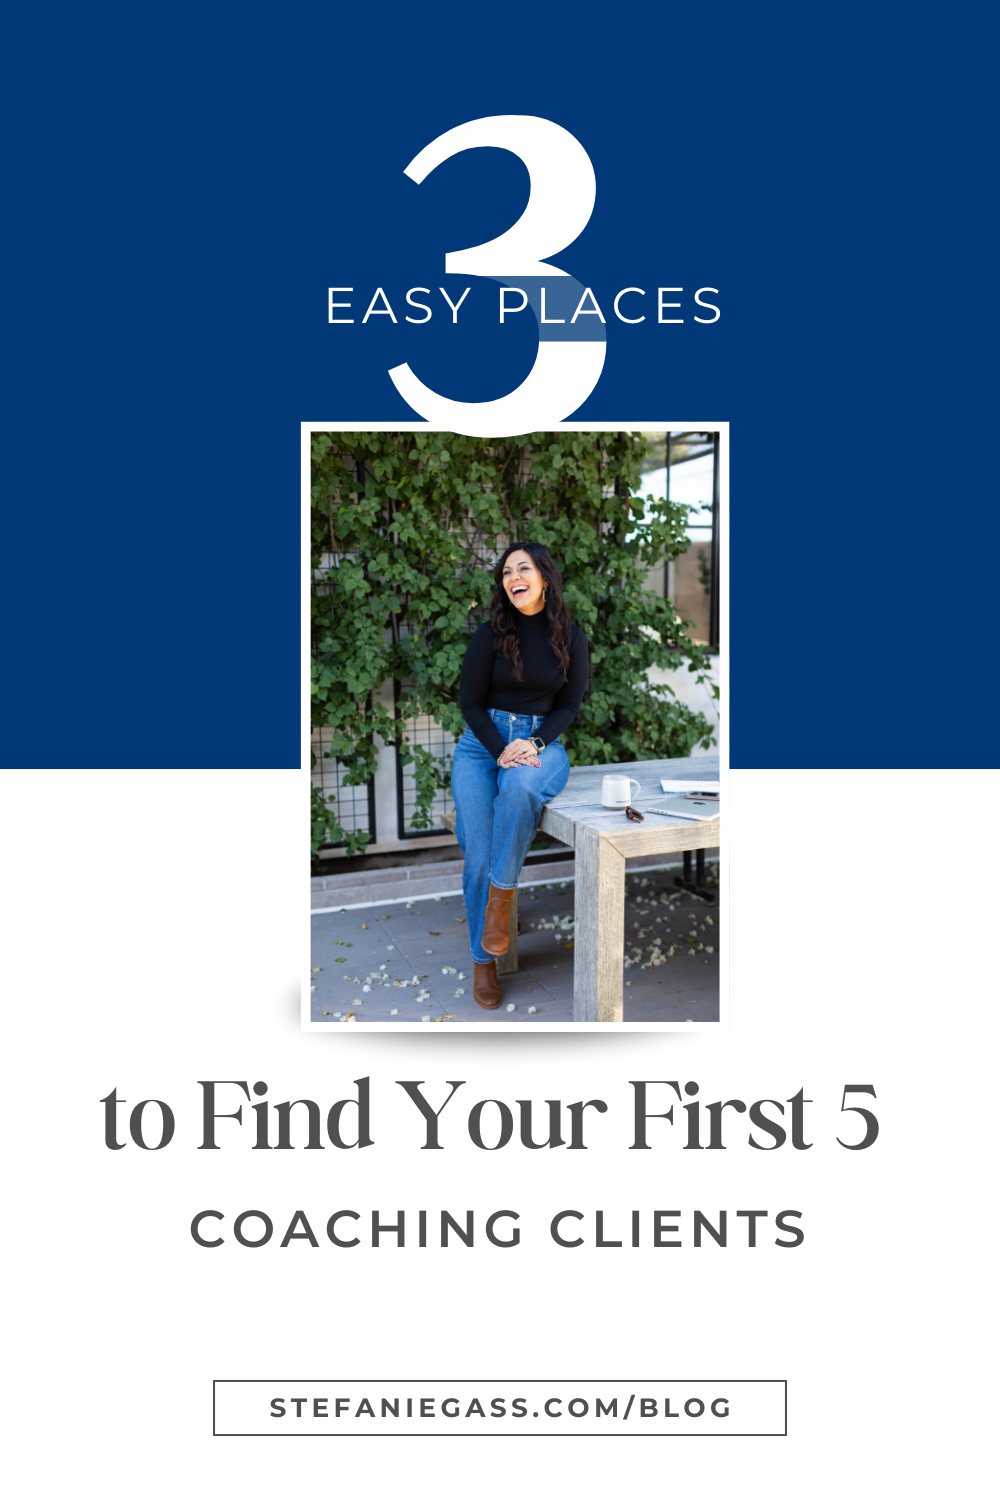 Smiling dark haired woman. Text says " 3 Easy Places to Find Your First 5 Coaching Clients"